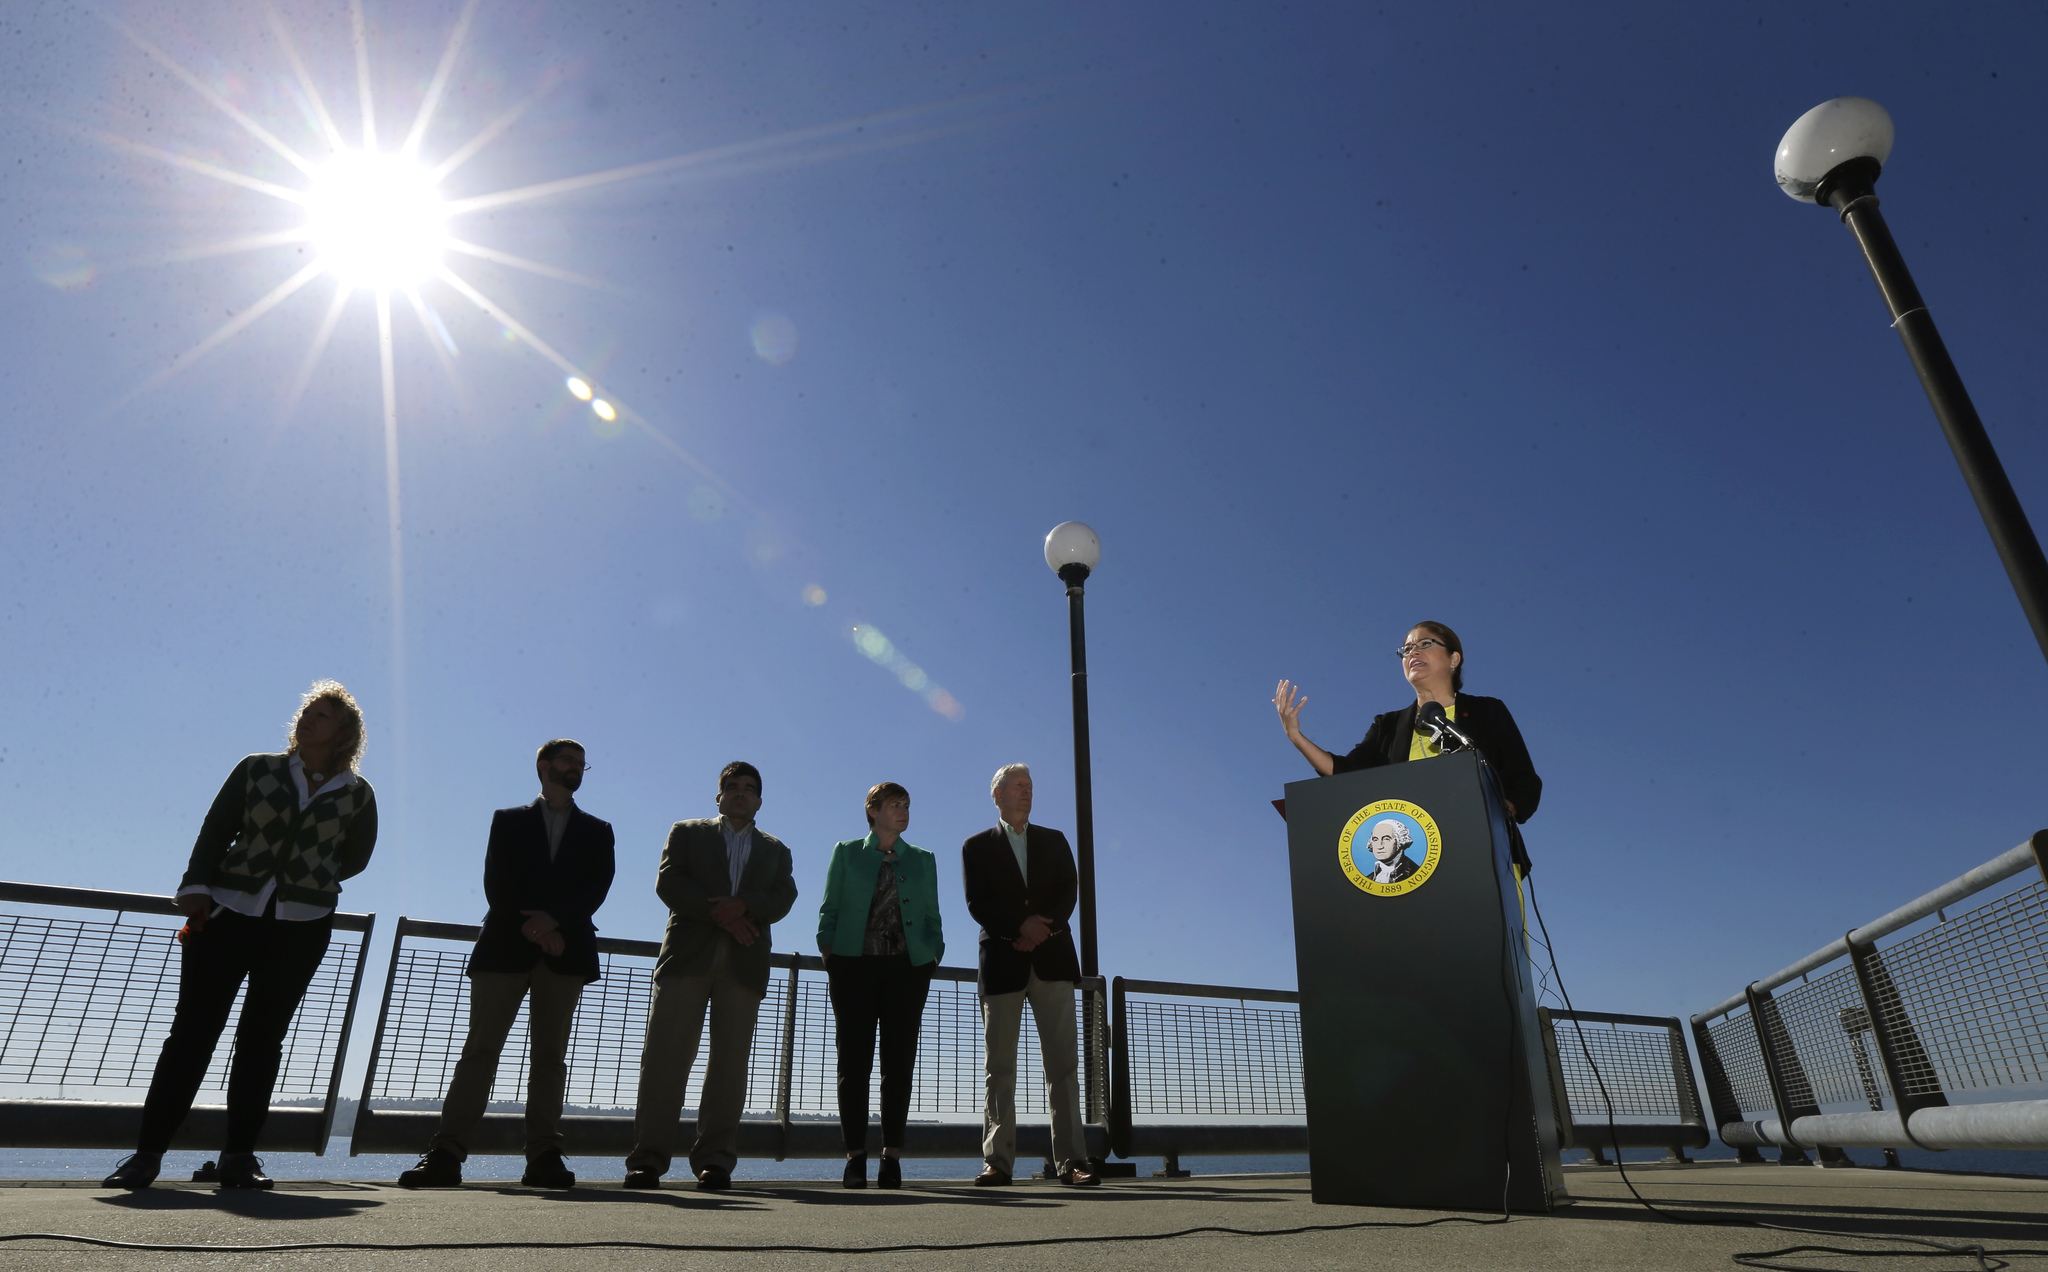 Maia Bellon, right, director of the state Department of Ecology, speaks at a news conference Thursday overlooking Elliott Bay in Seattle. (Ted S. Warren/The Associated Press)